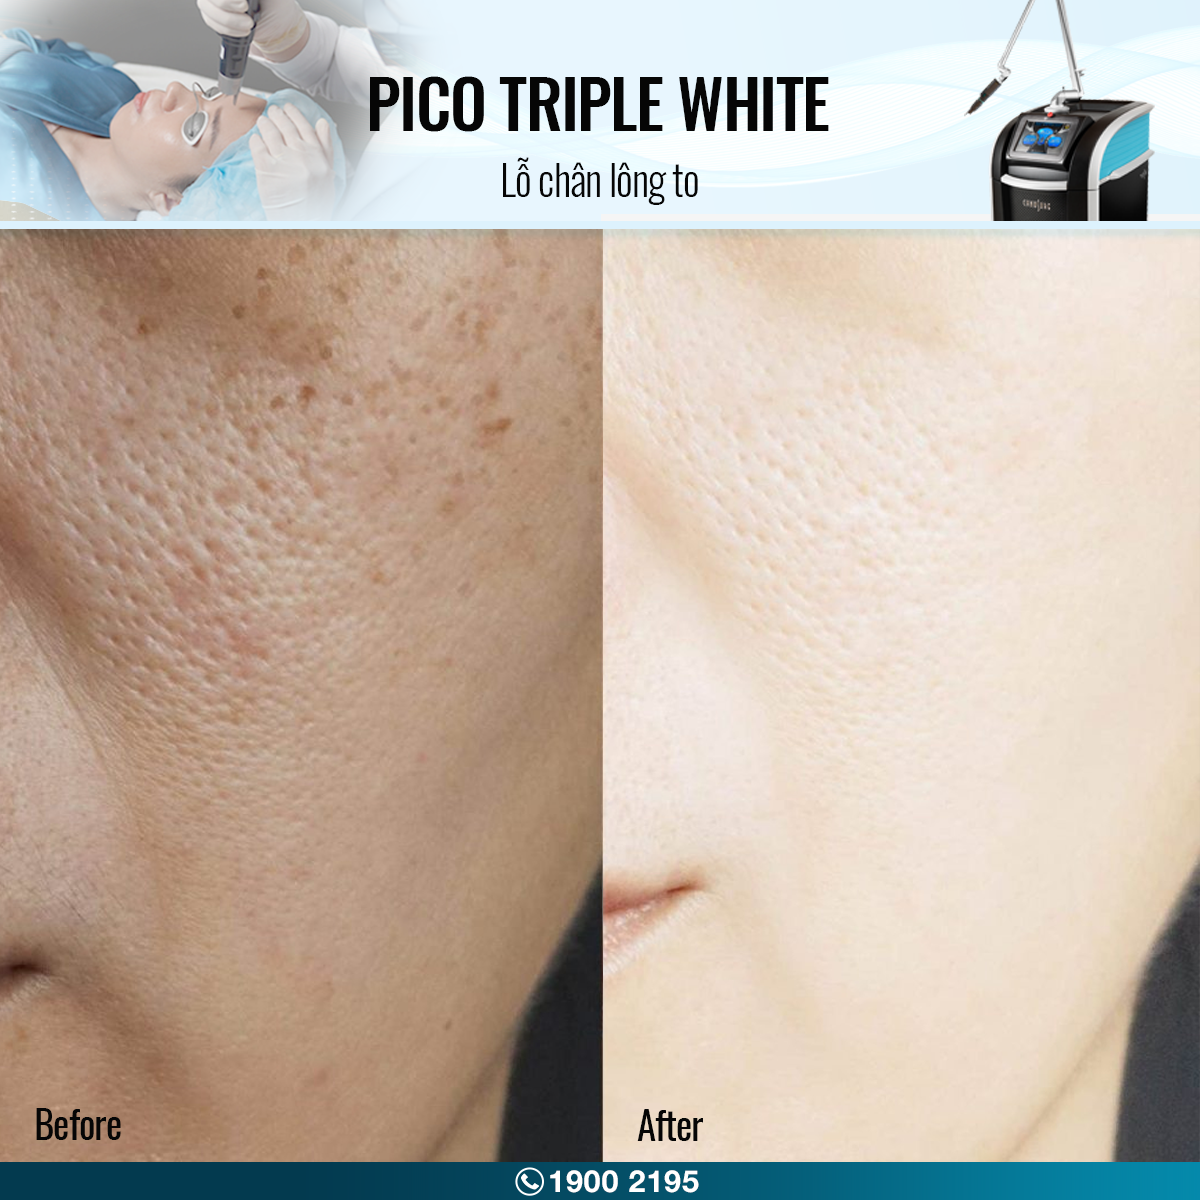 before after pico triple white lỗ chân lông to